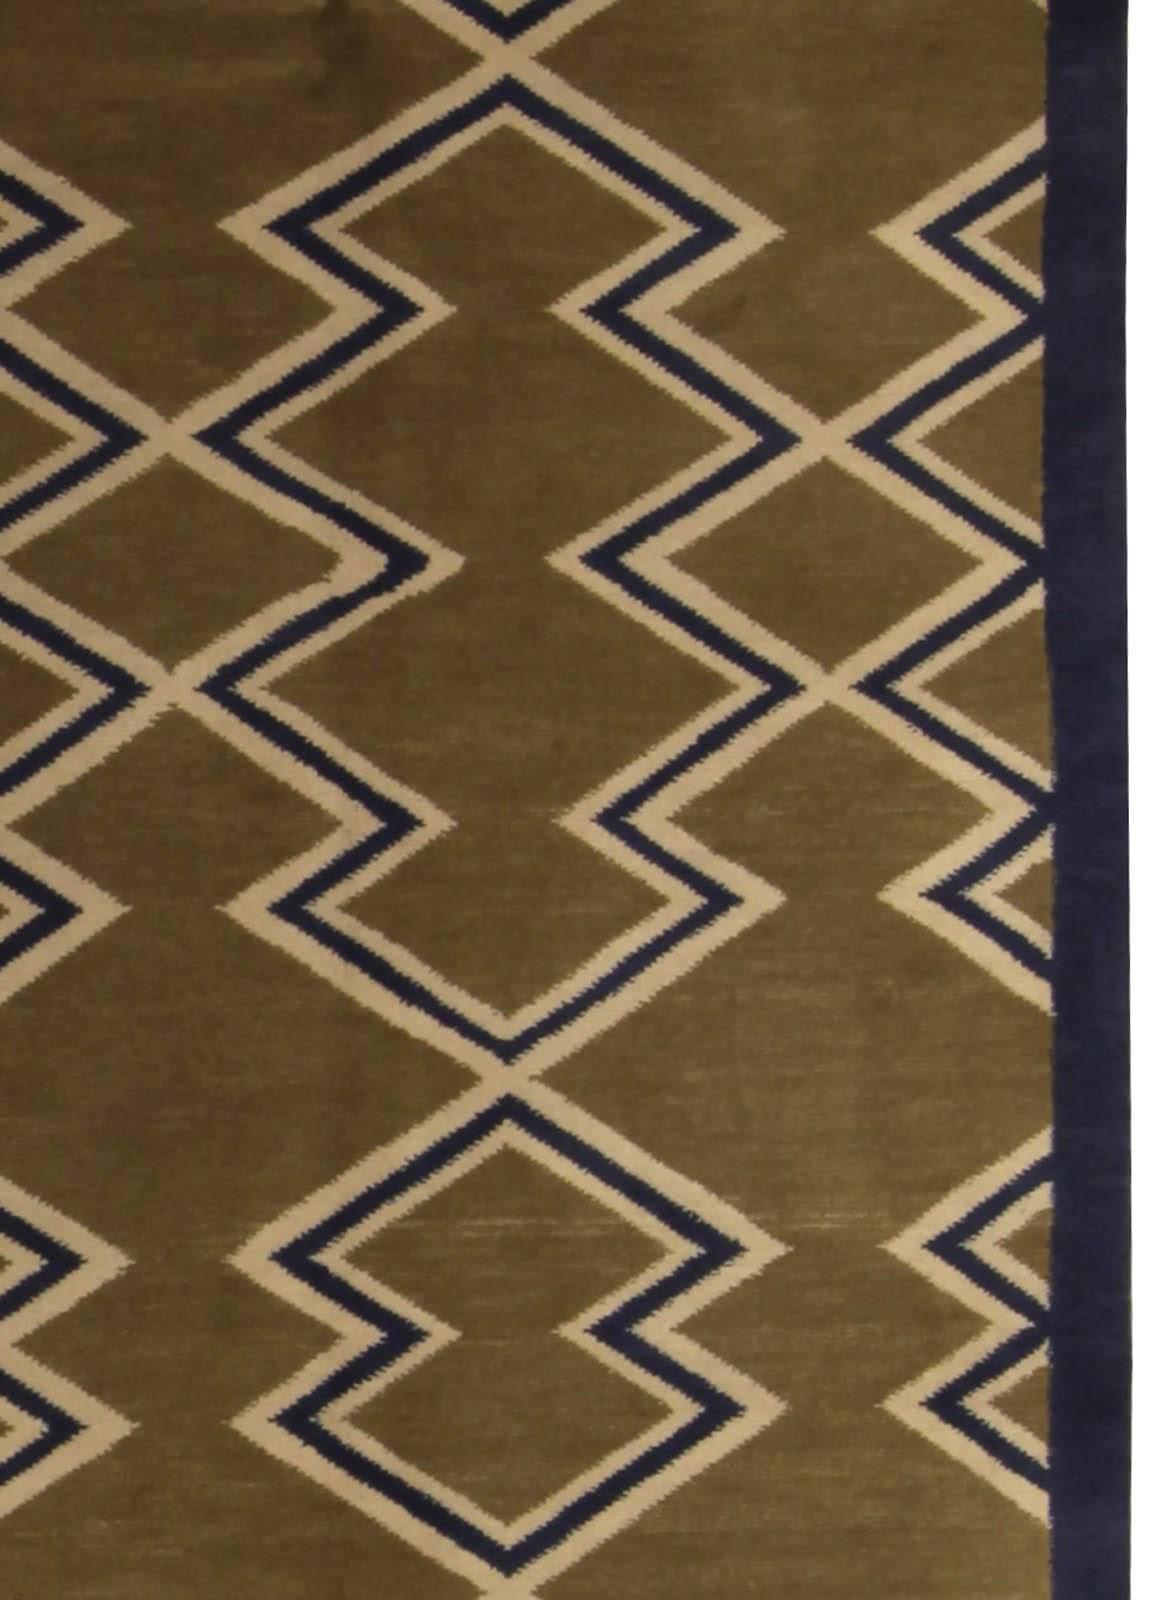 Modern Aztec Geometric Design Rug by Doris Leslie Blau In New Condition For Sale In New York, NY